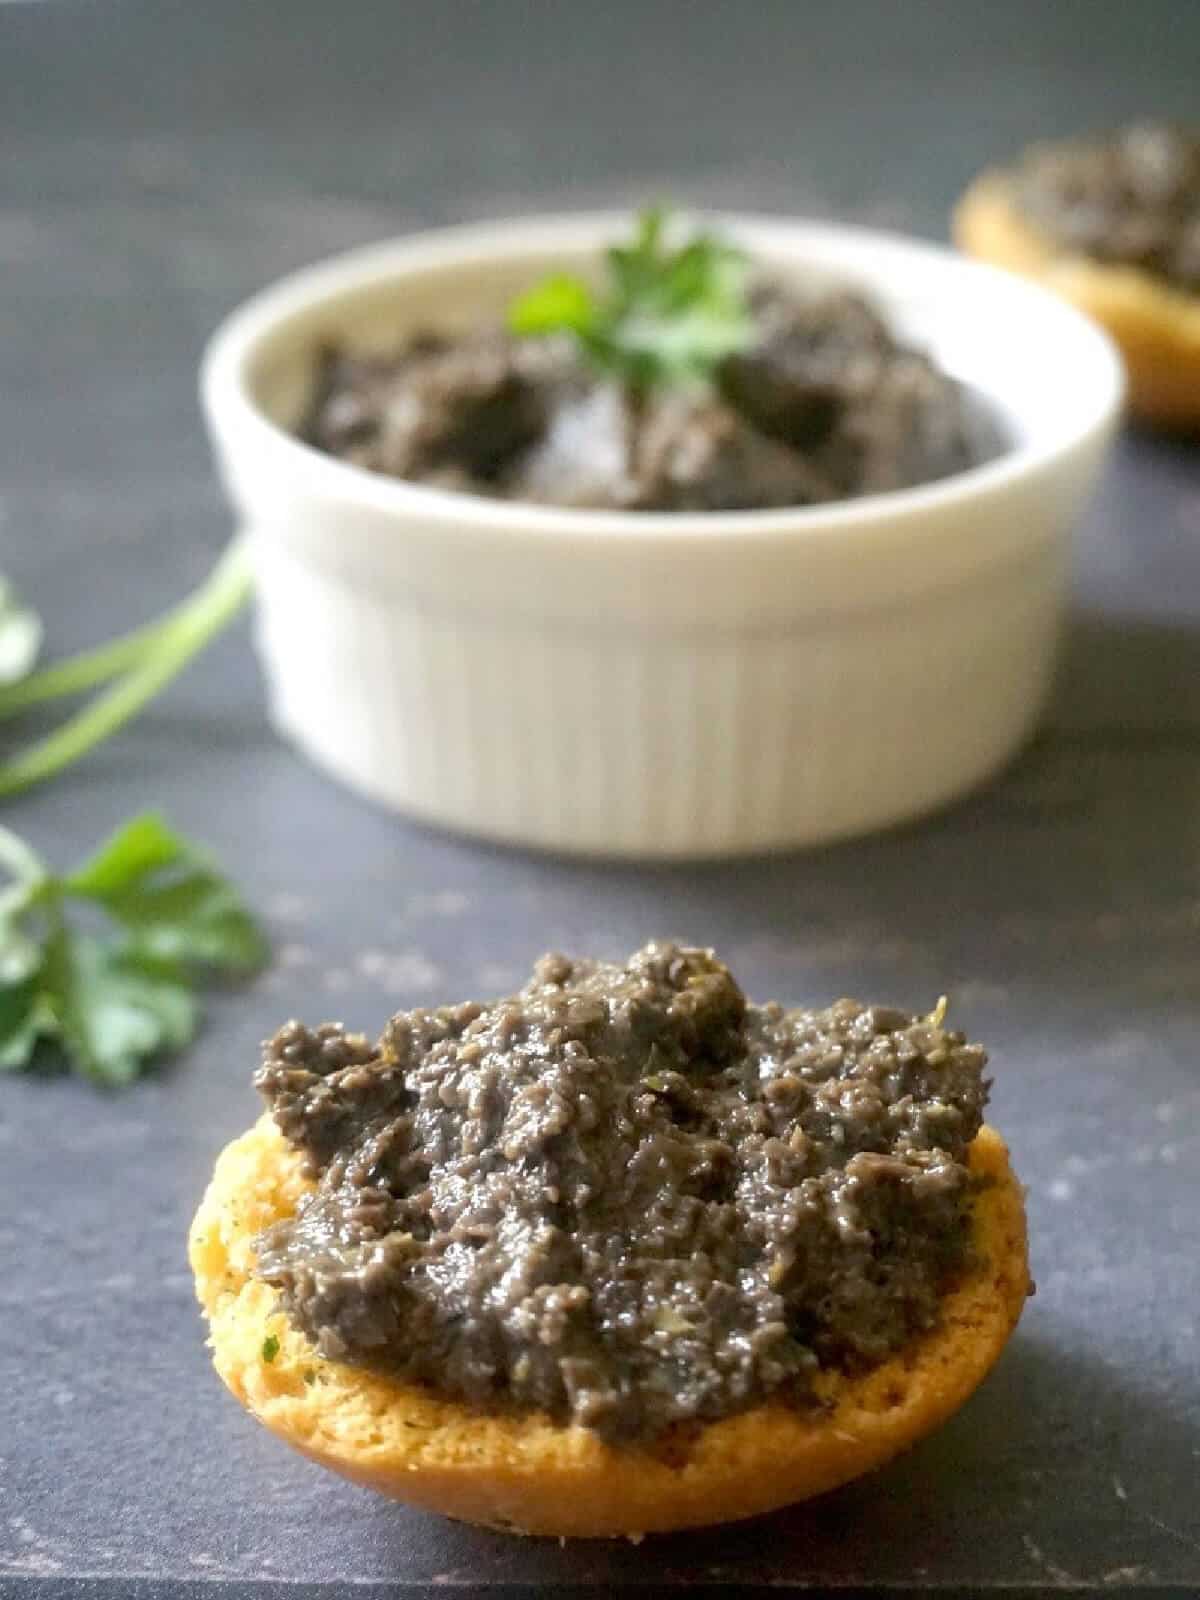 A slice of bread with tepenade and a white ramekin with more tapenade.